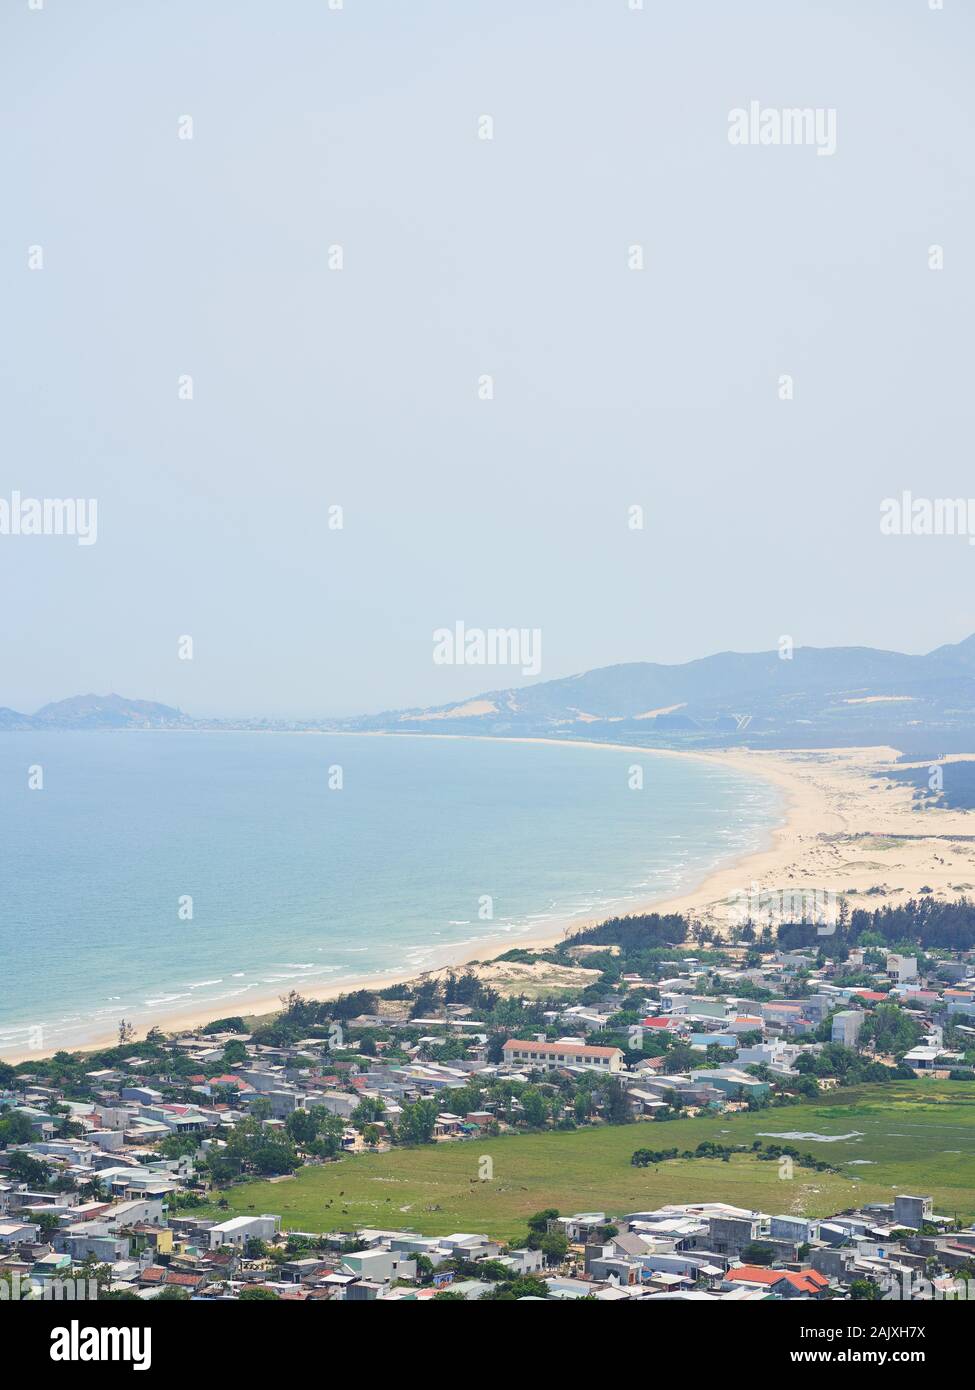 Skyline and beach from Ong Nui Temple in Qui Nhon Stock Photo